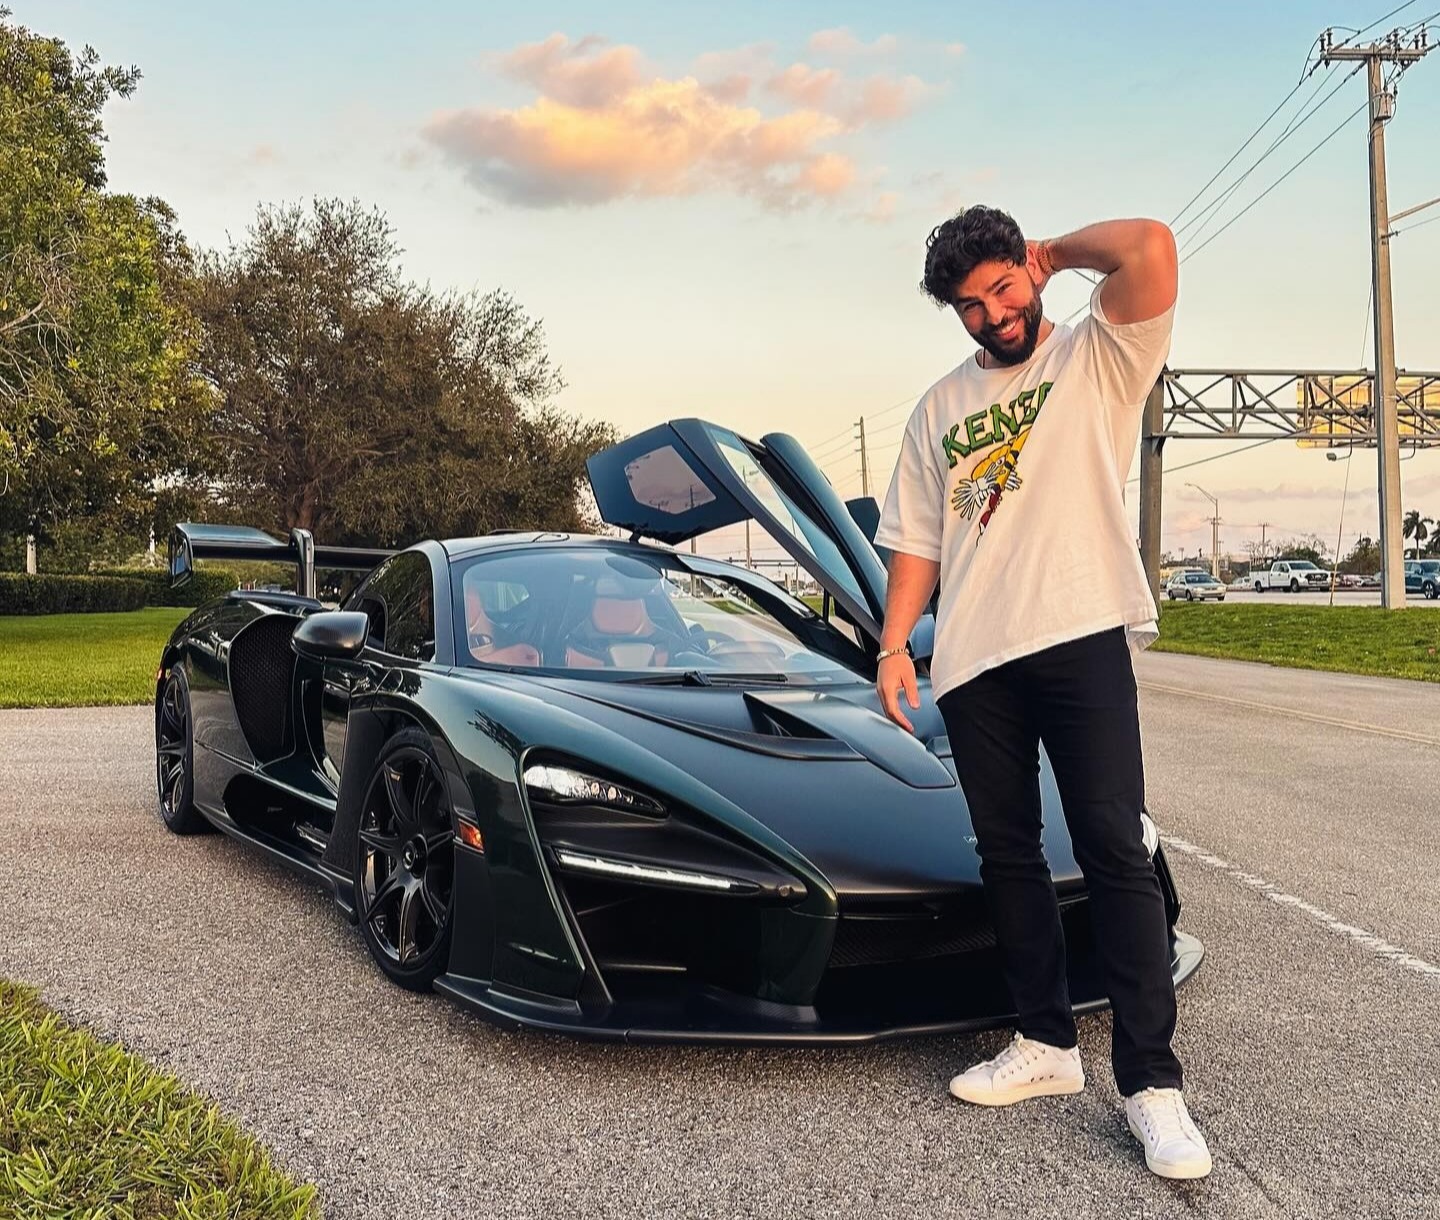 The YouTuber crashed the £1.3m McLaren Senna just days after buying it